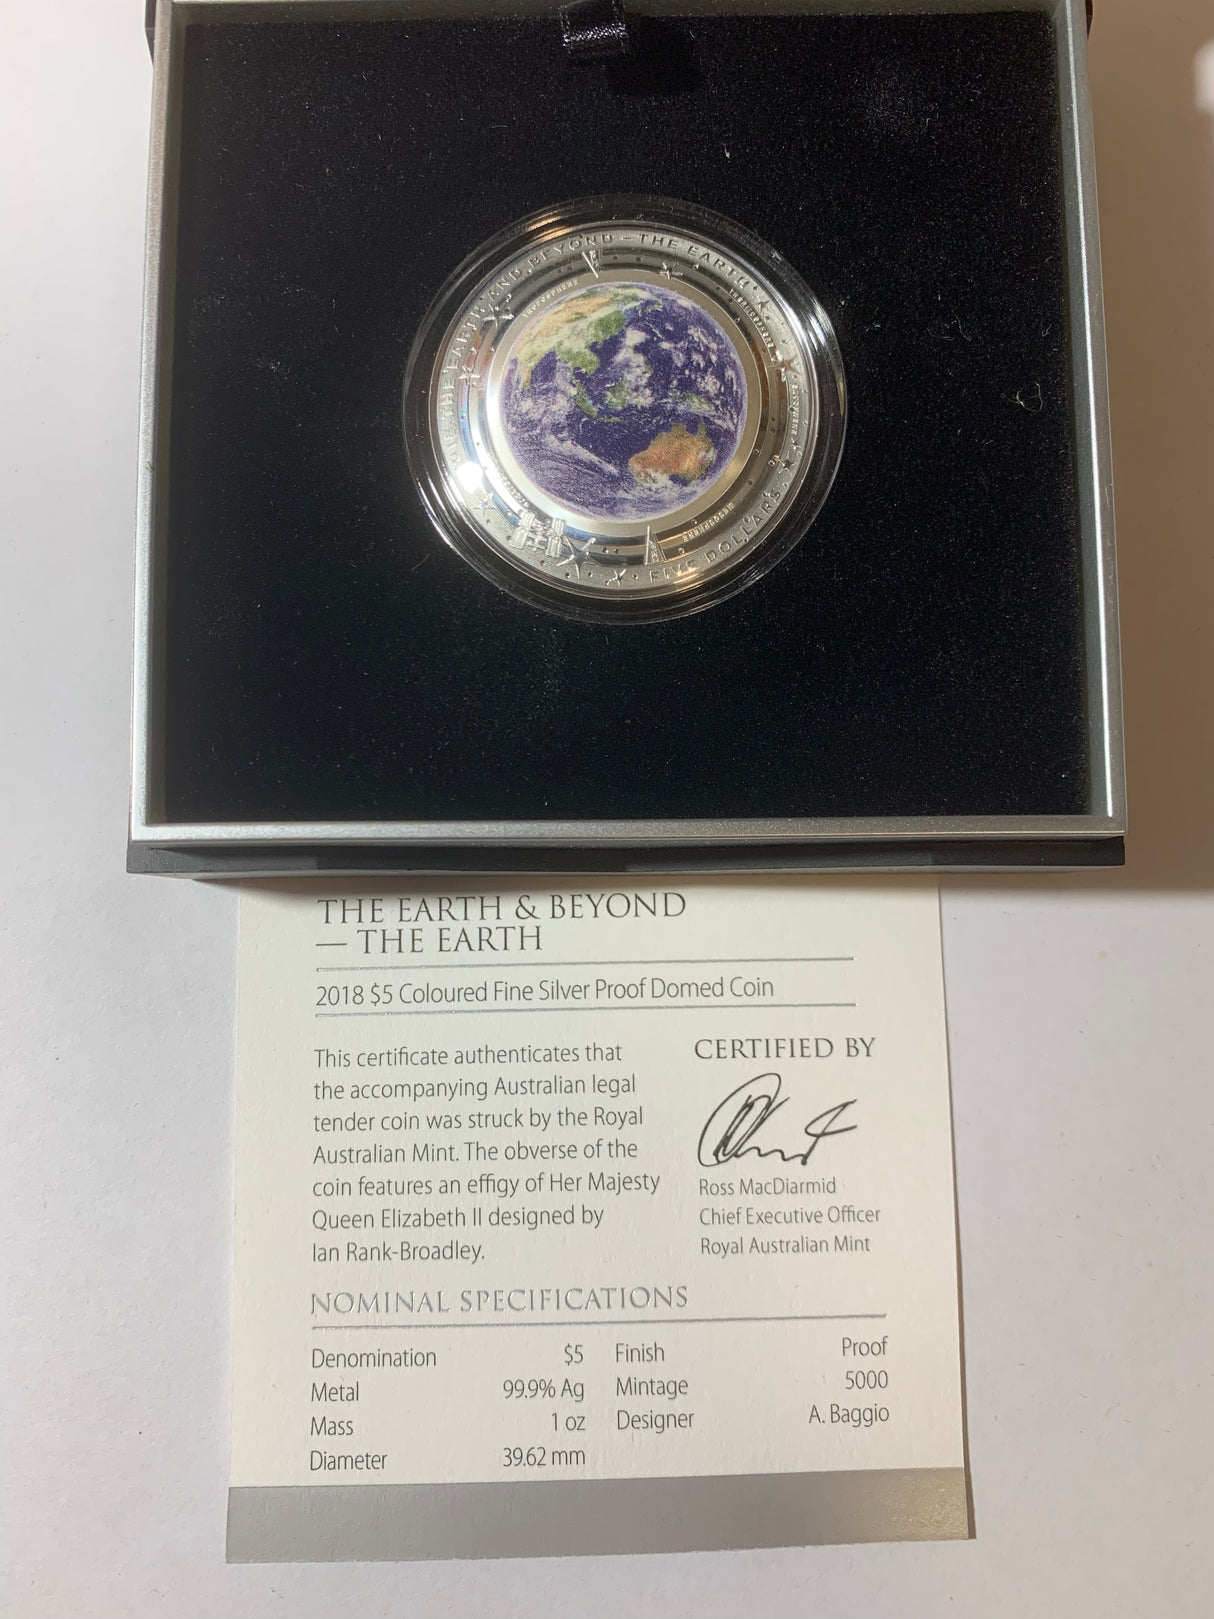 2018 $5 1oz Coloured Fine Silver Proof Domed Coin. The Earth and Beyond Series. The Earth.